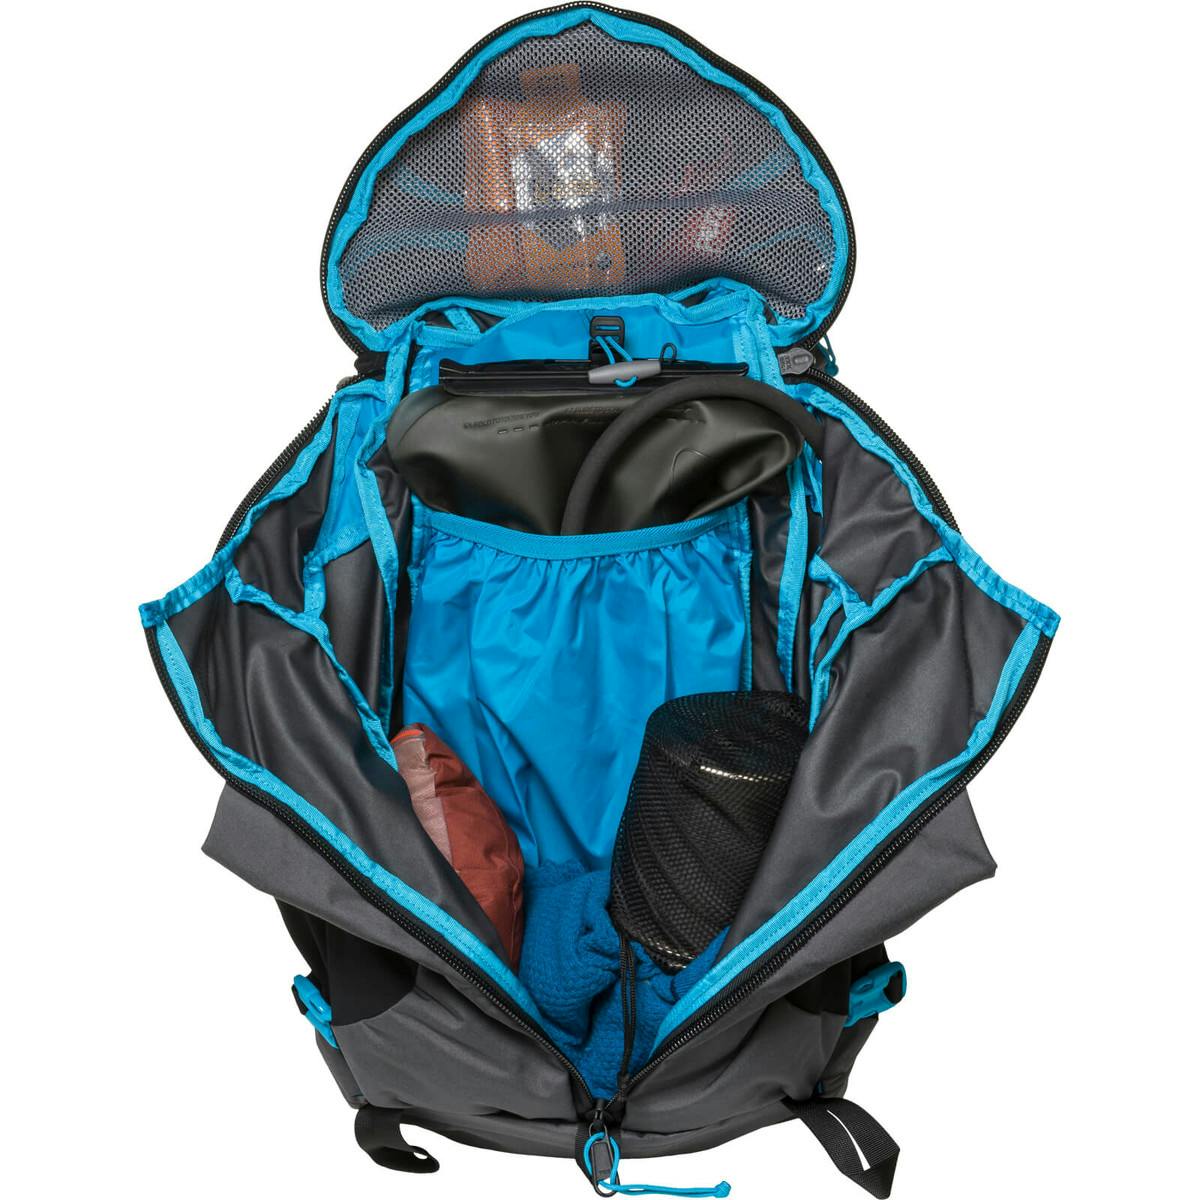 Mystery Ranch Coulee 25L Backpack · Women's · Shadow Moon